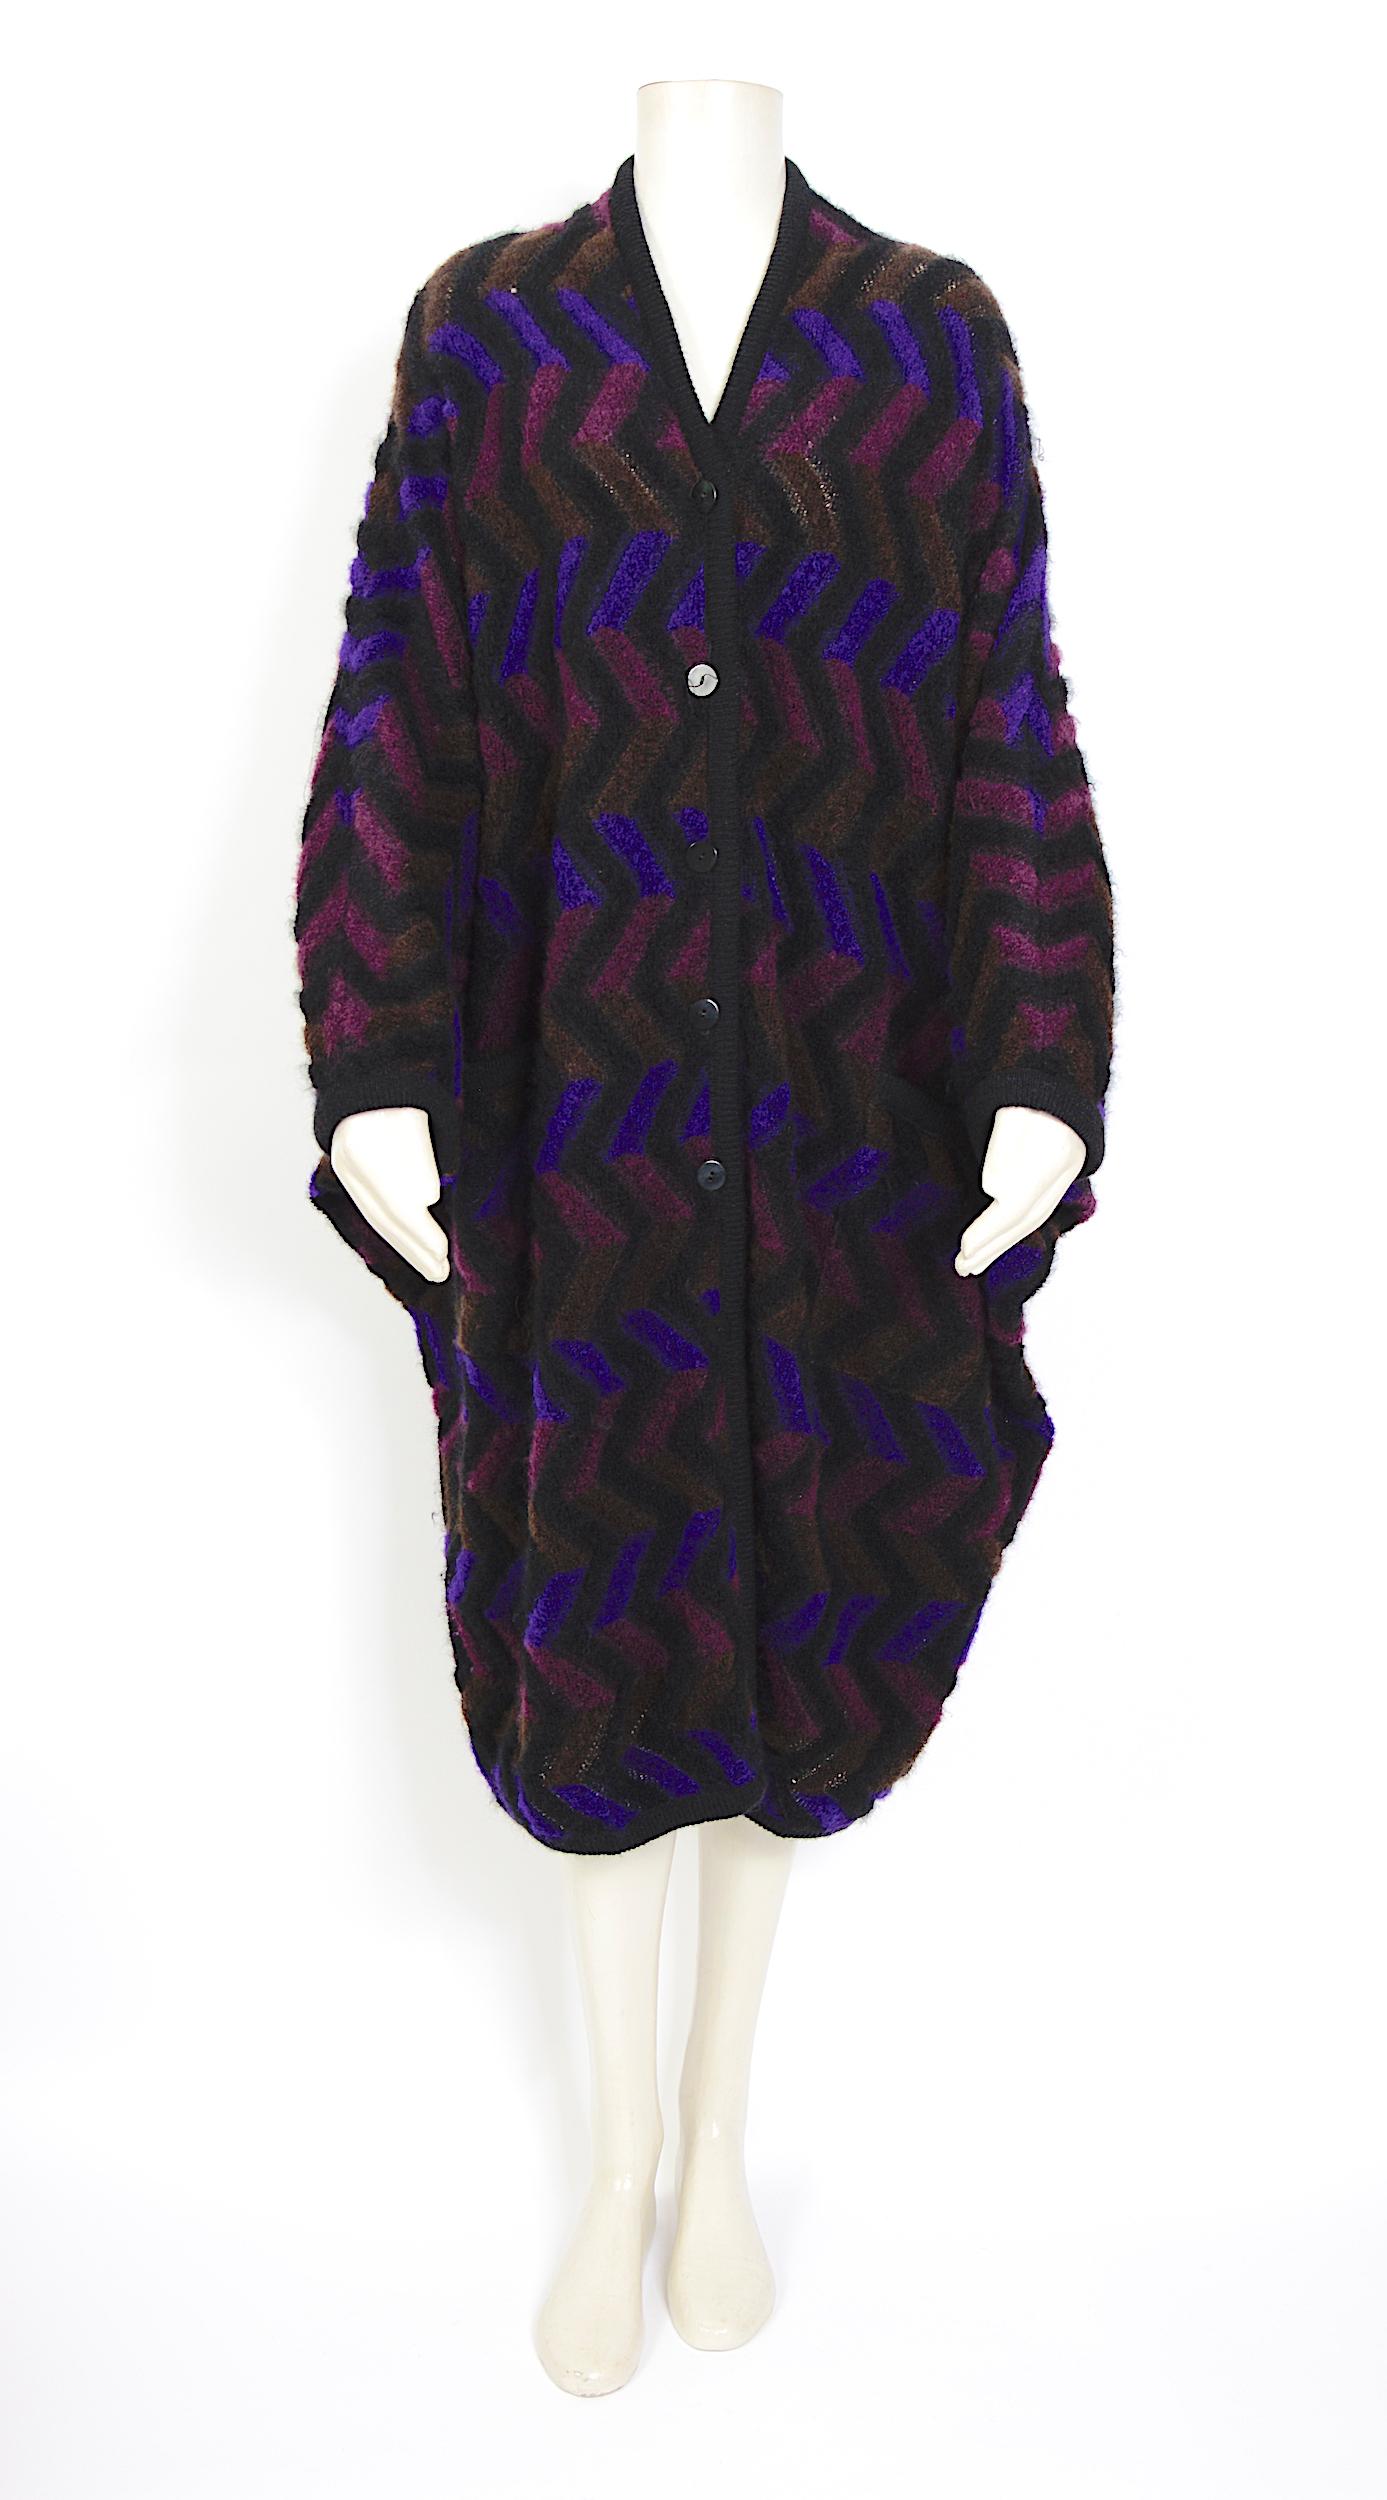 This cool vintage 1980s design by Missoni is composed of multi-color knit with batwing sleeves and front slide pockets. In excellent vintage pre-worn and loved condition.
Made in Italy size 44
Measurements are taken flat: Size free - Total Length